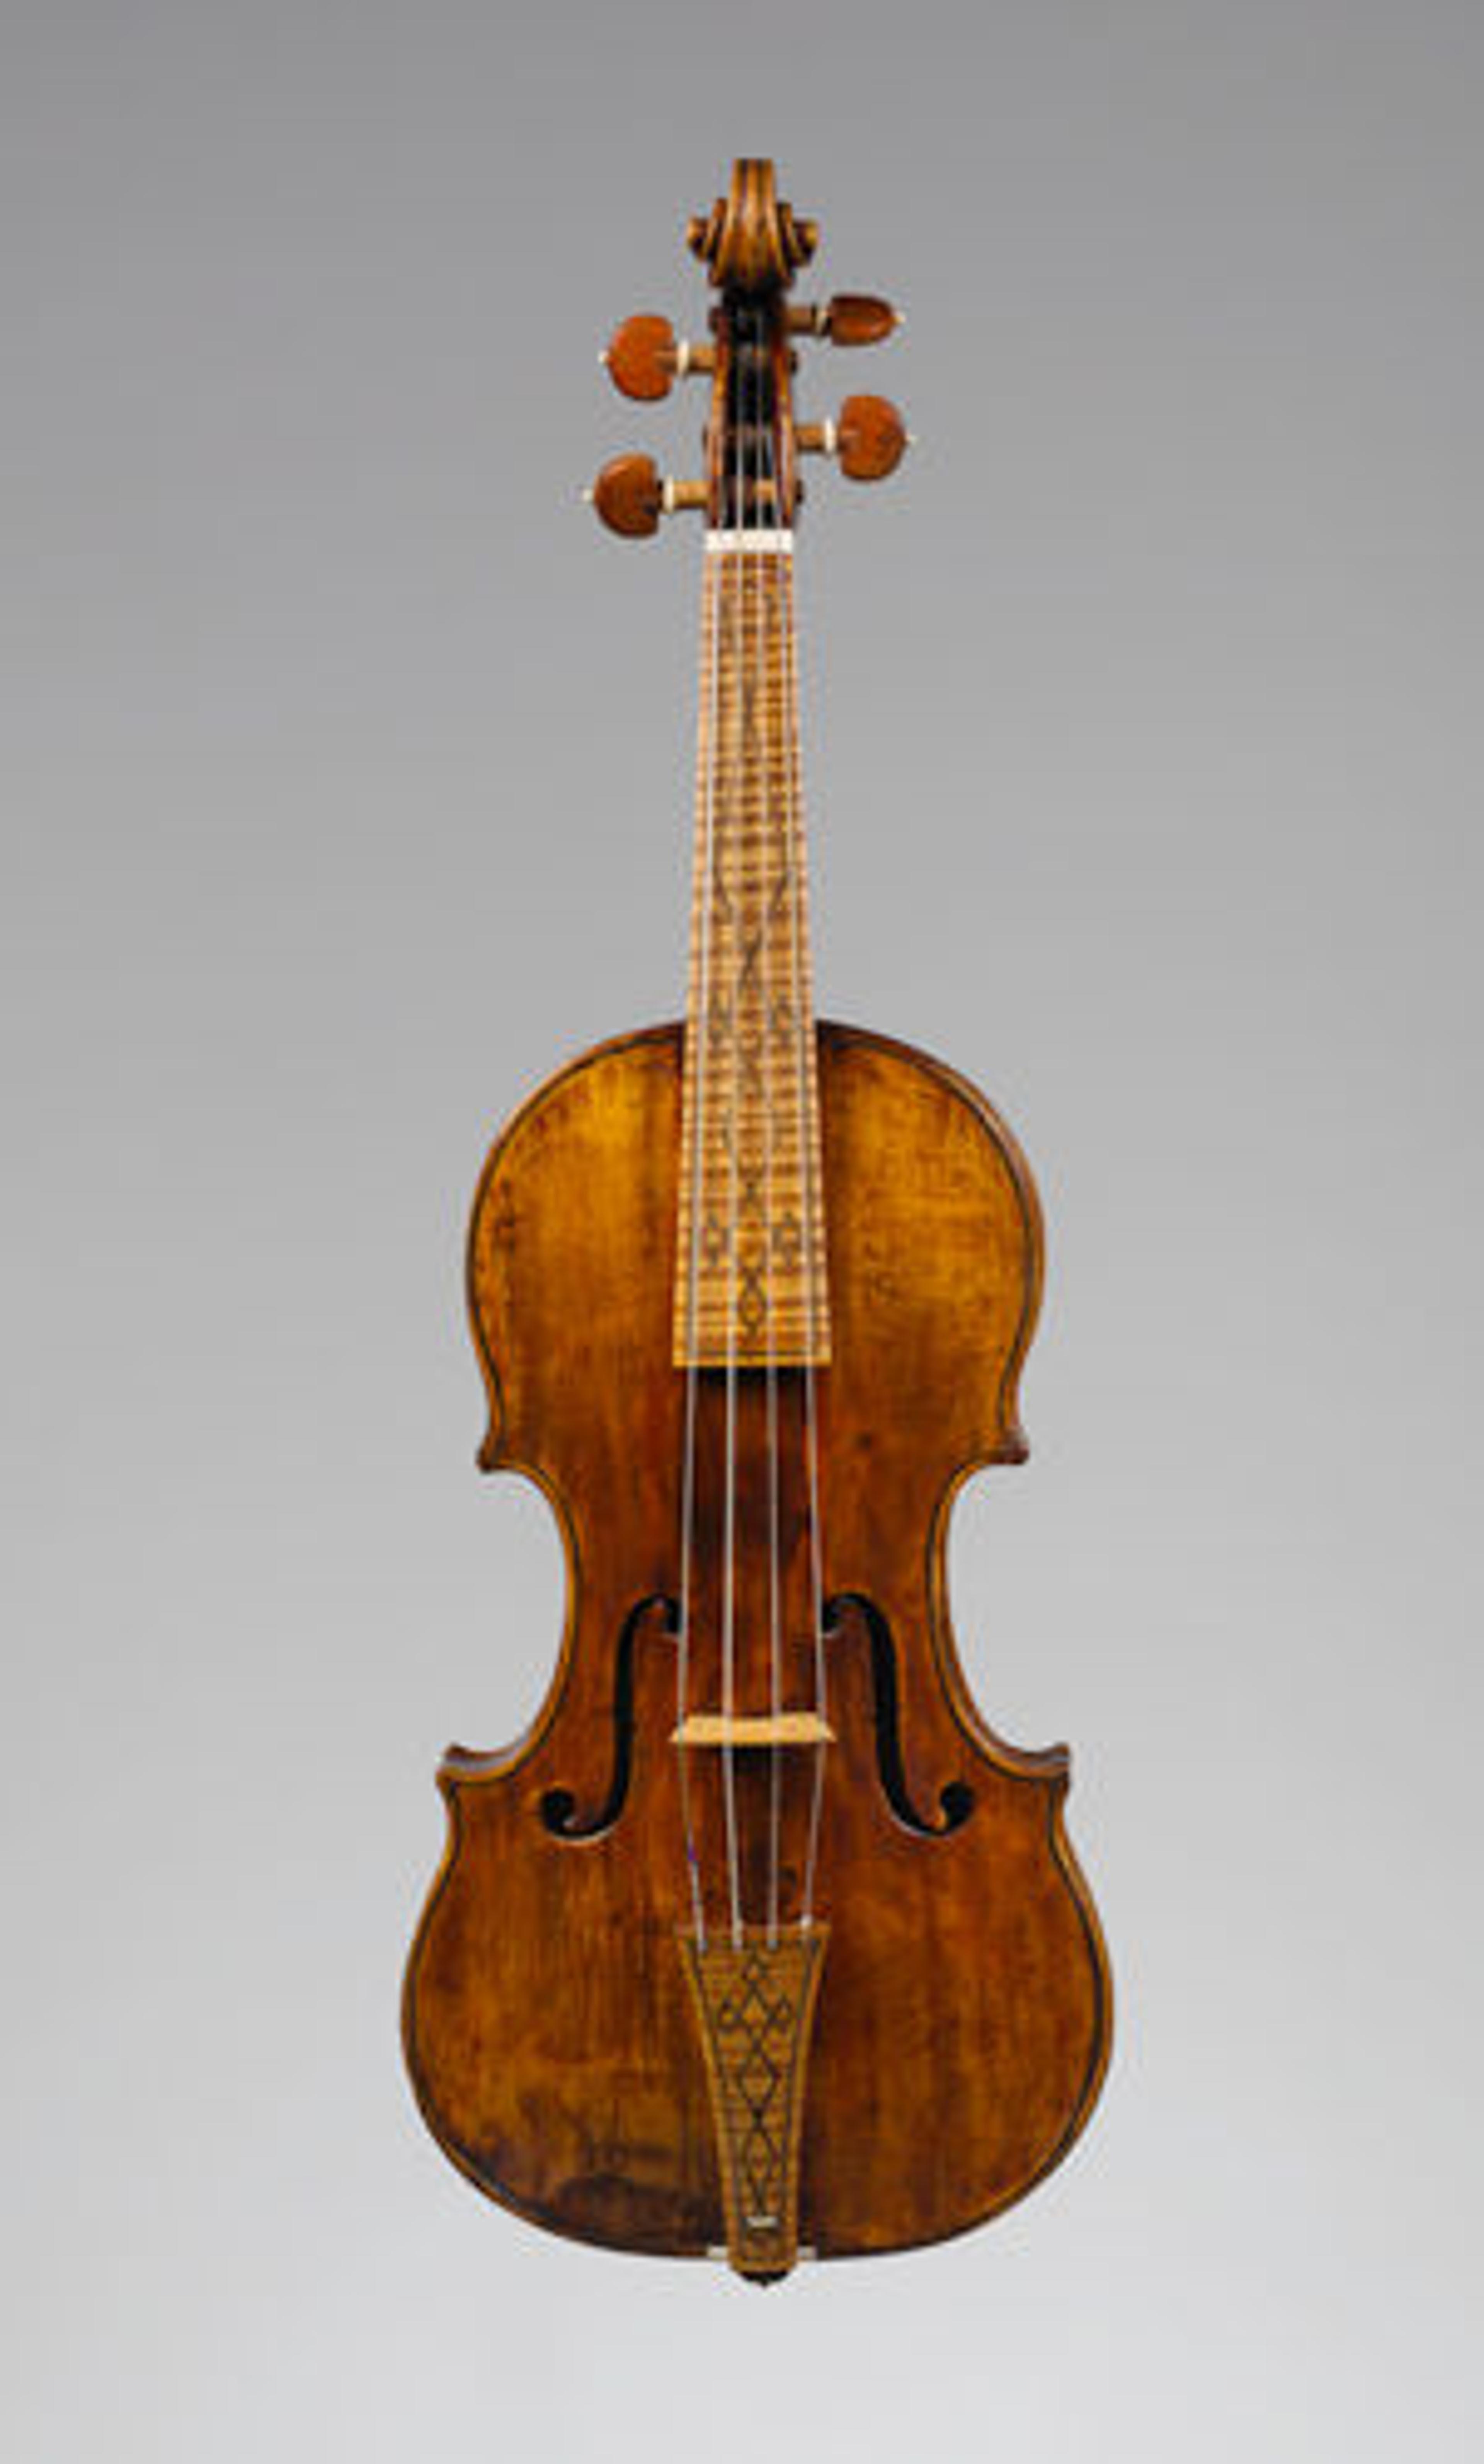 Nicolò Amati (Italian, 1596–1684). Violin, 1669. Cremona, Italy. Spruce, maple, other woods. The Metropolitan Museum of Art, New York, Gift of Evelyn Stark, 1974 (1974.229 a-d)